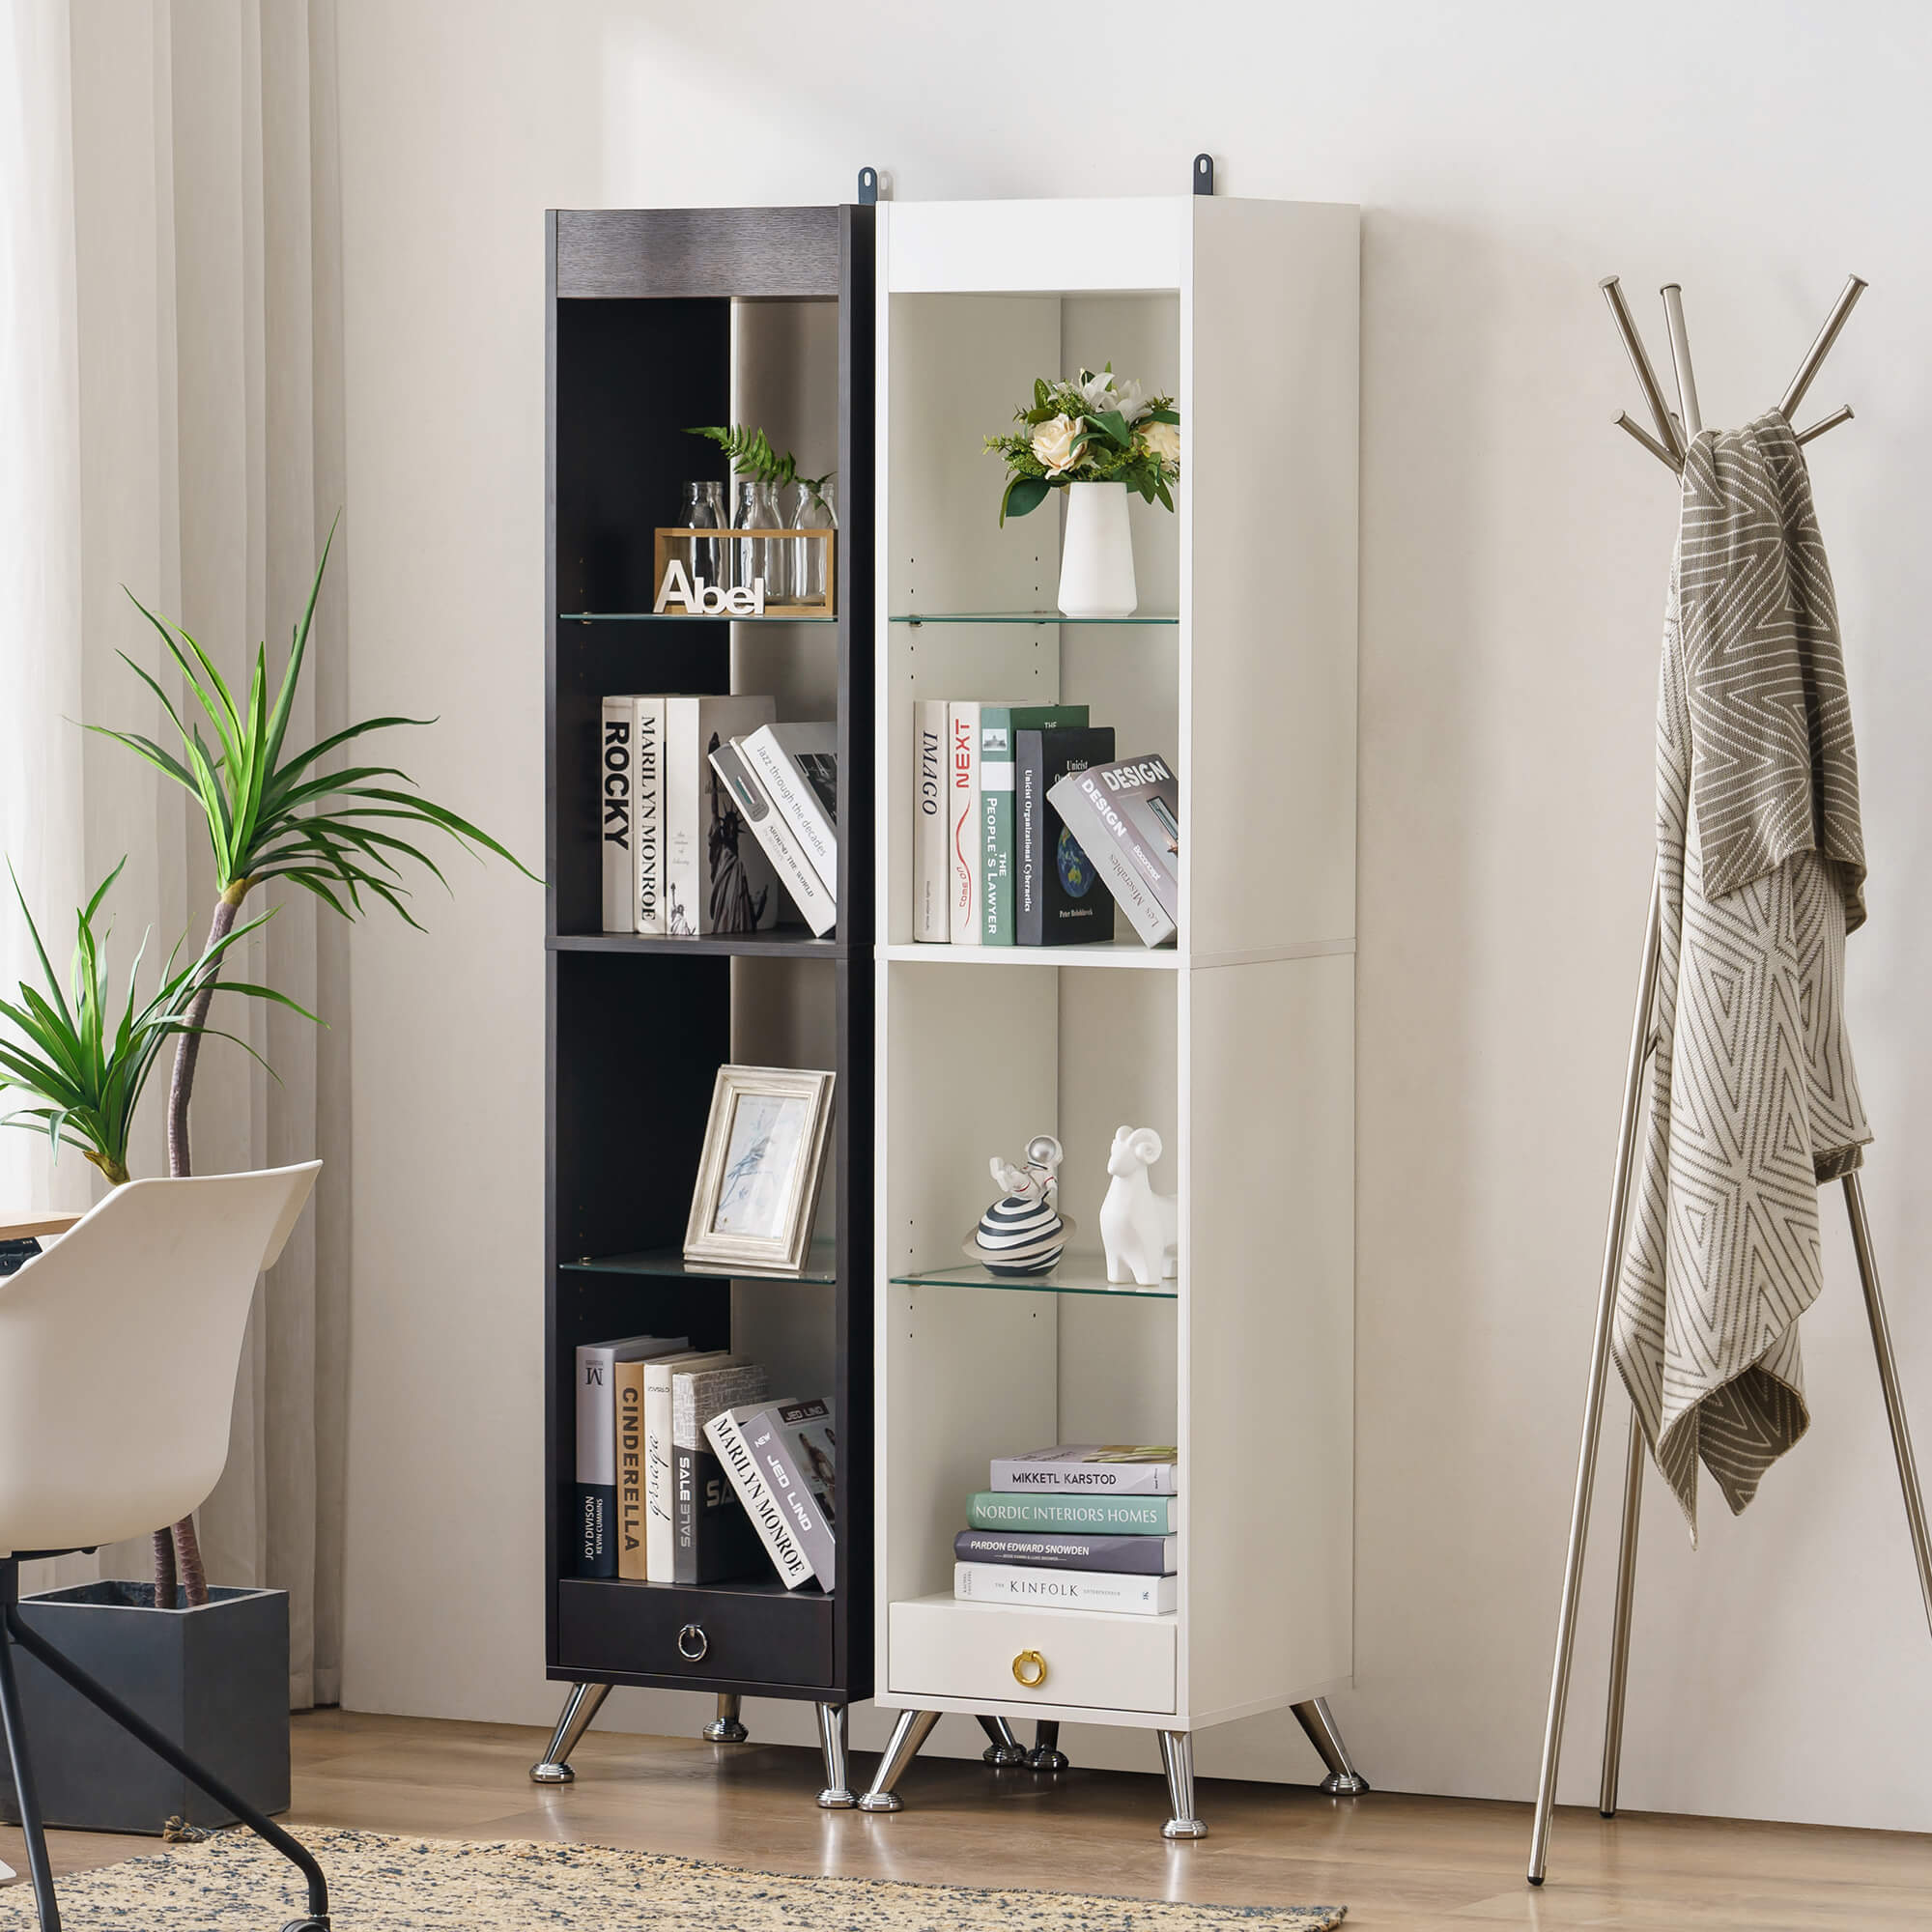 Ivinta tall bookshelf for small spaces, narrow bookcase with adjustable glass display shelf